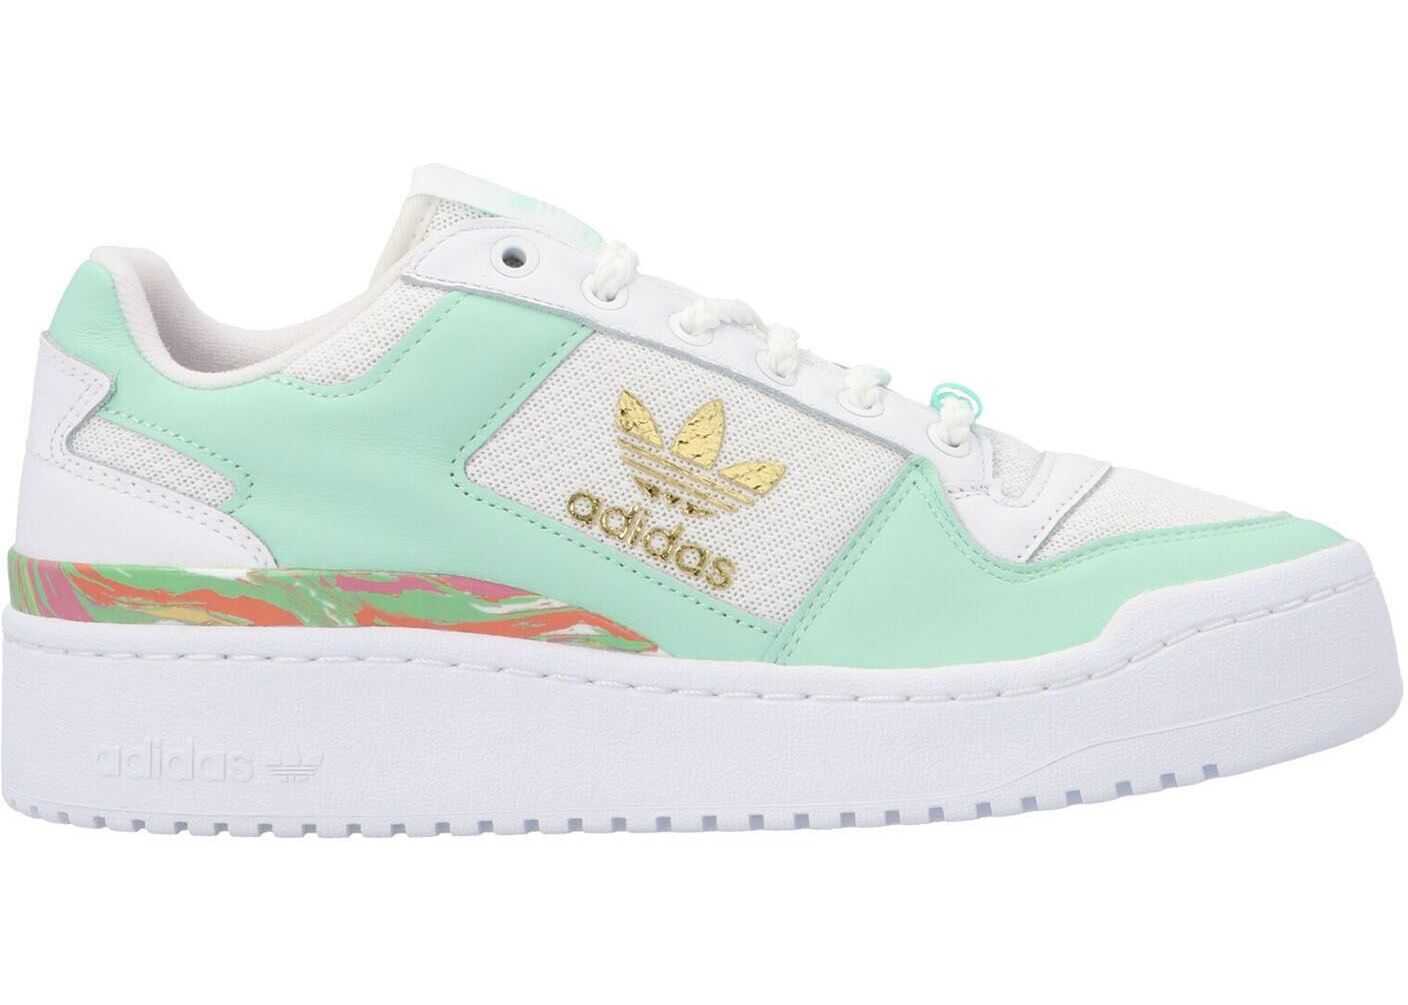 adidas Originals Forum Bold Sneakers In White And Green FY5117 Green